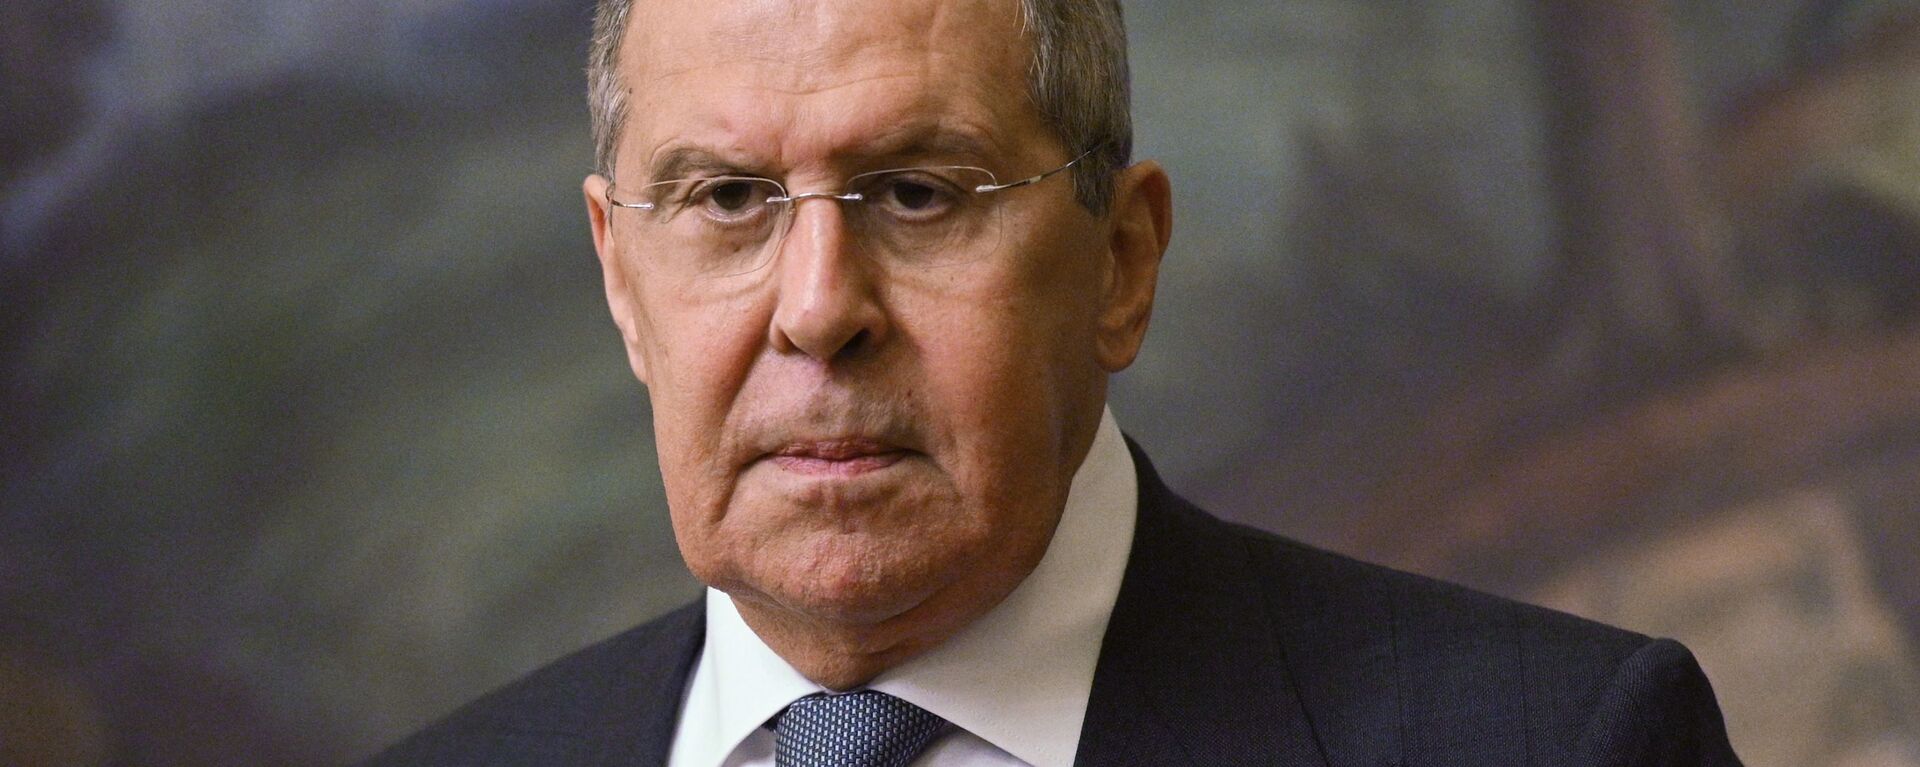 Russian Foreign Minister Sergei Lavrov at a press conference following a meeting in Moscow with the Minister of Foreign Affairs of the Kingdom of Bahrain Abdel Latyf bin Rashid Az-Zayani. - Sputnik International, 1920, 08.07.2021